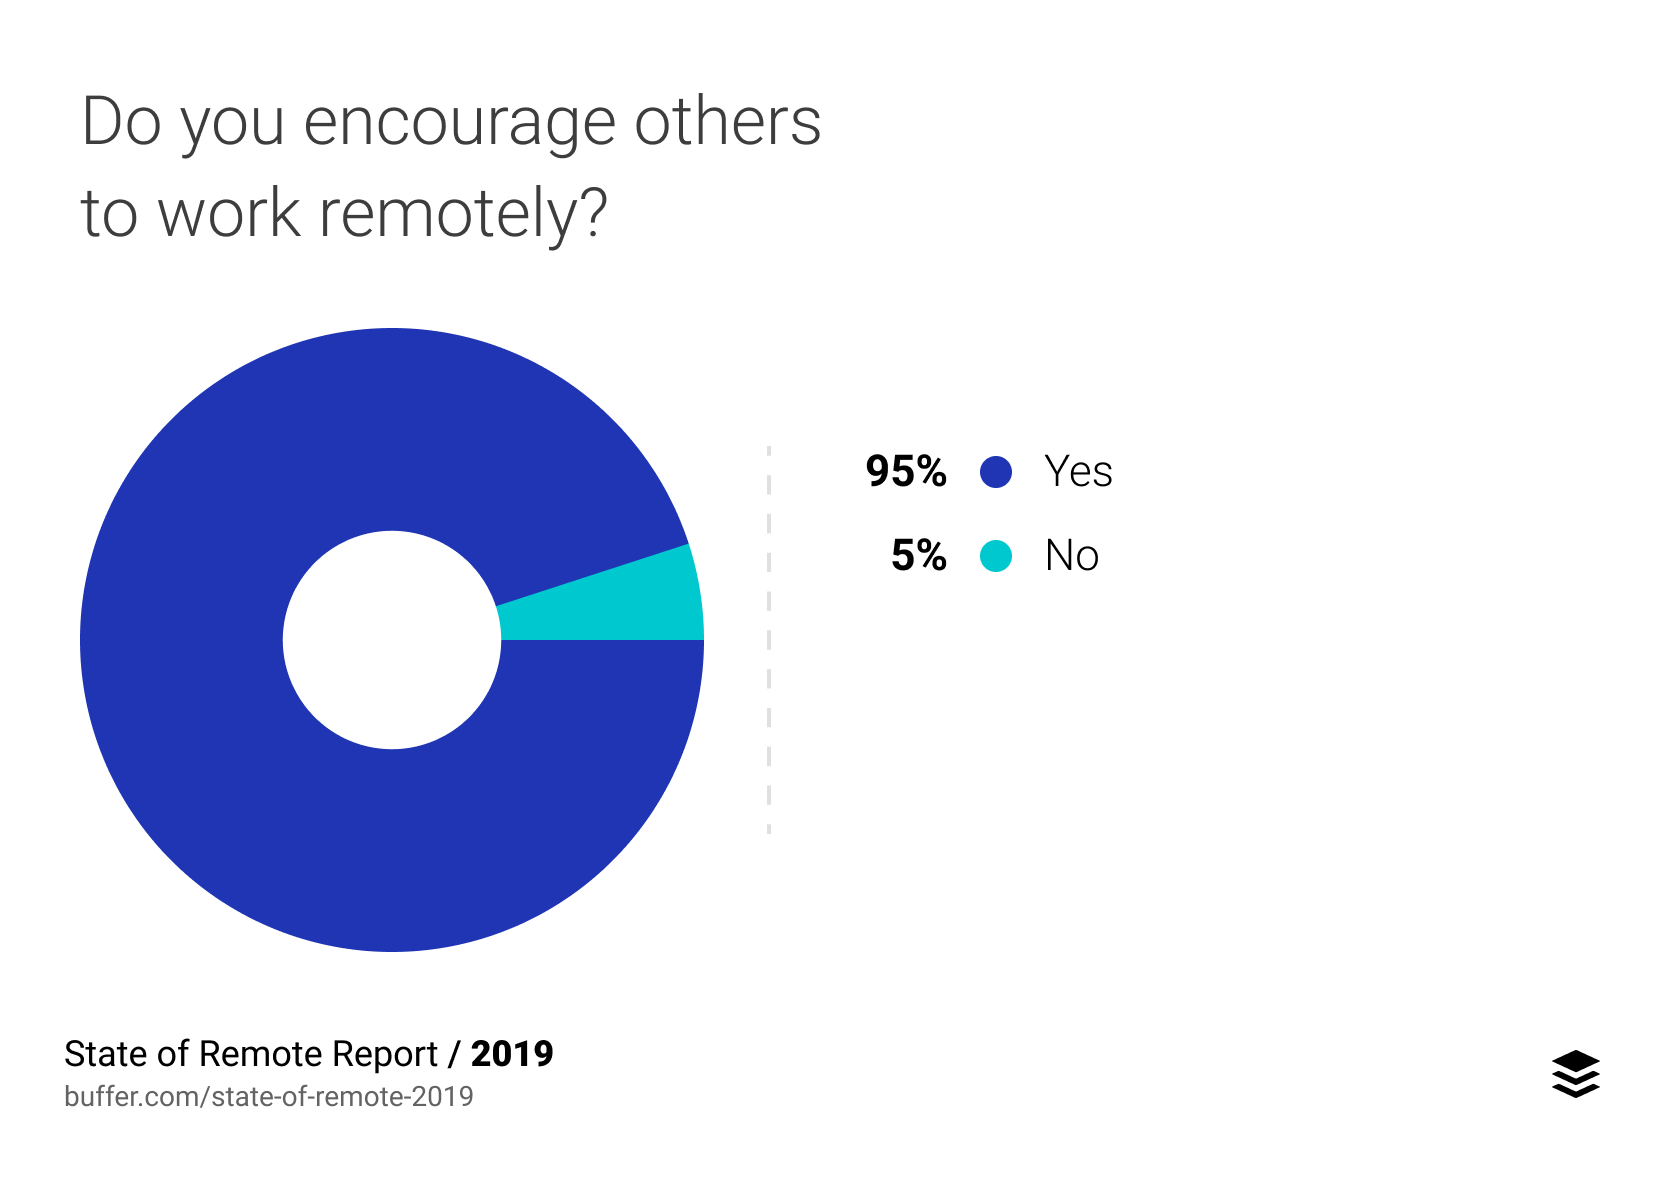 Do you encourage others to work remotely?